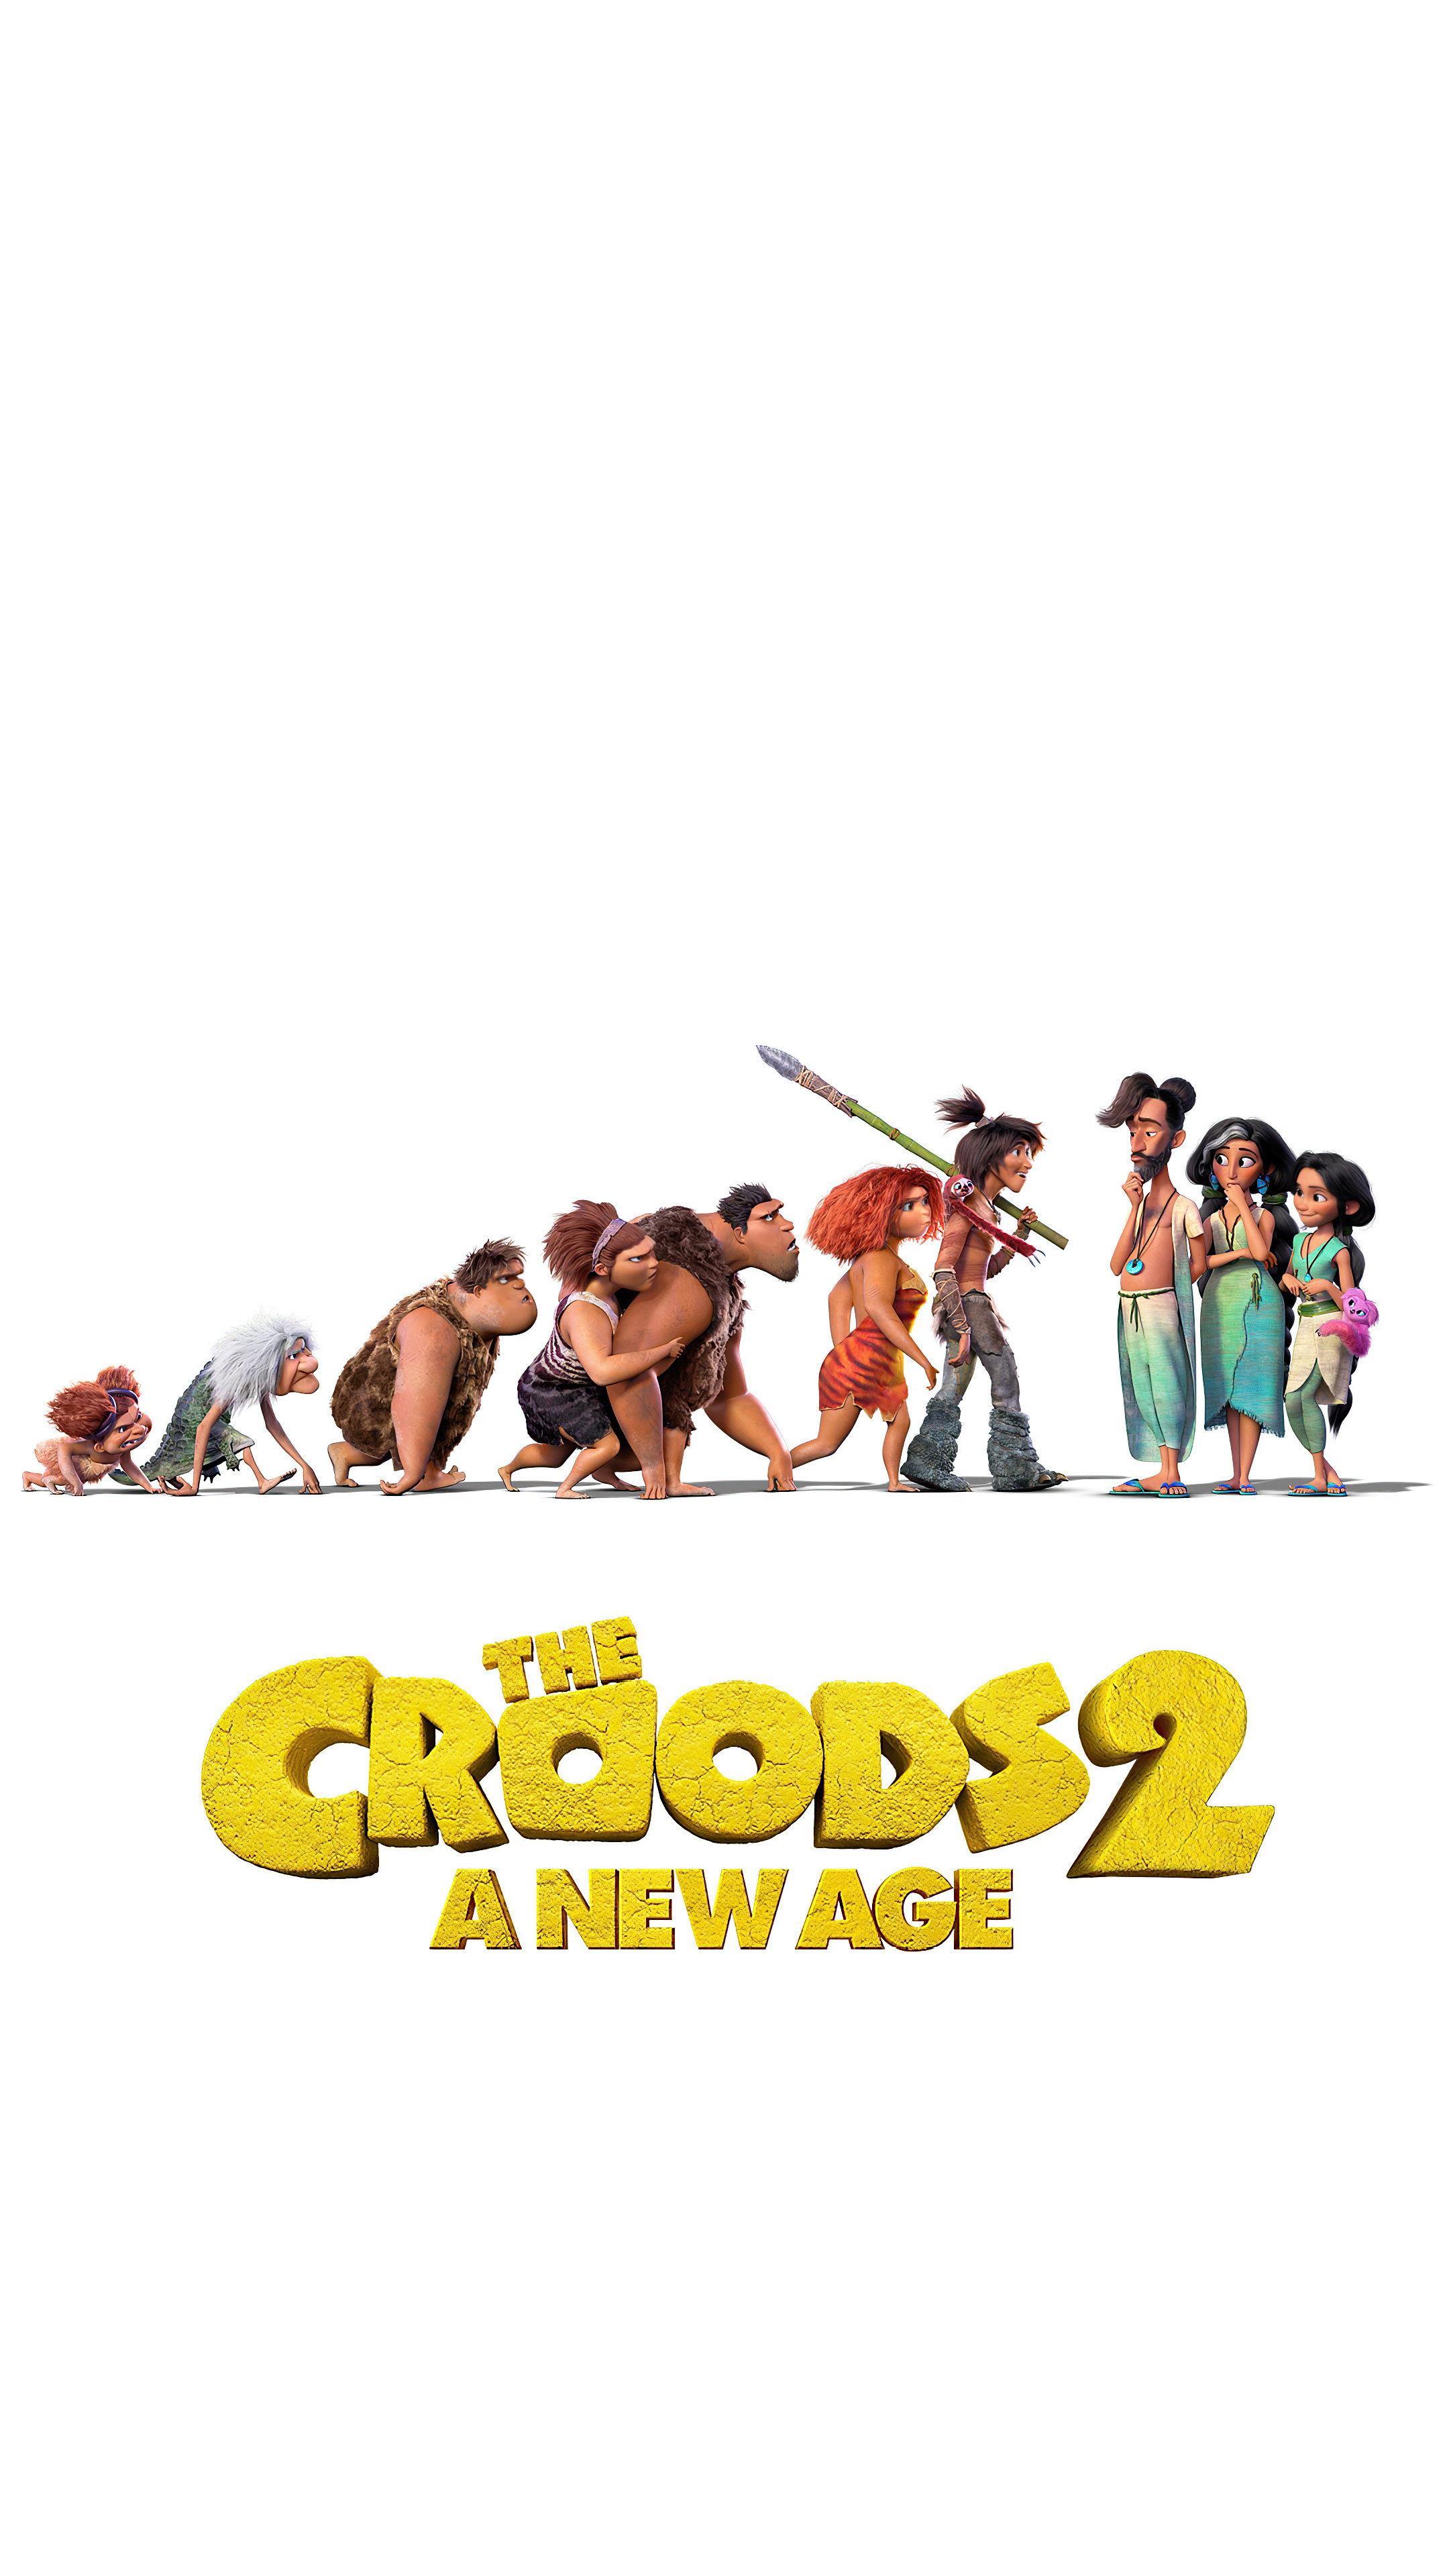 The Croods: A New Age wallpapers, Sony Xperia wallpapers, 12K resolution, Crystal-clear visuals, 2160x3840 4K Phone